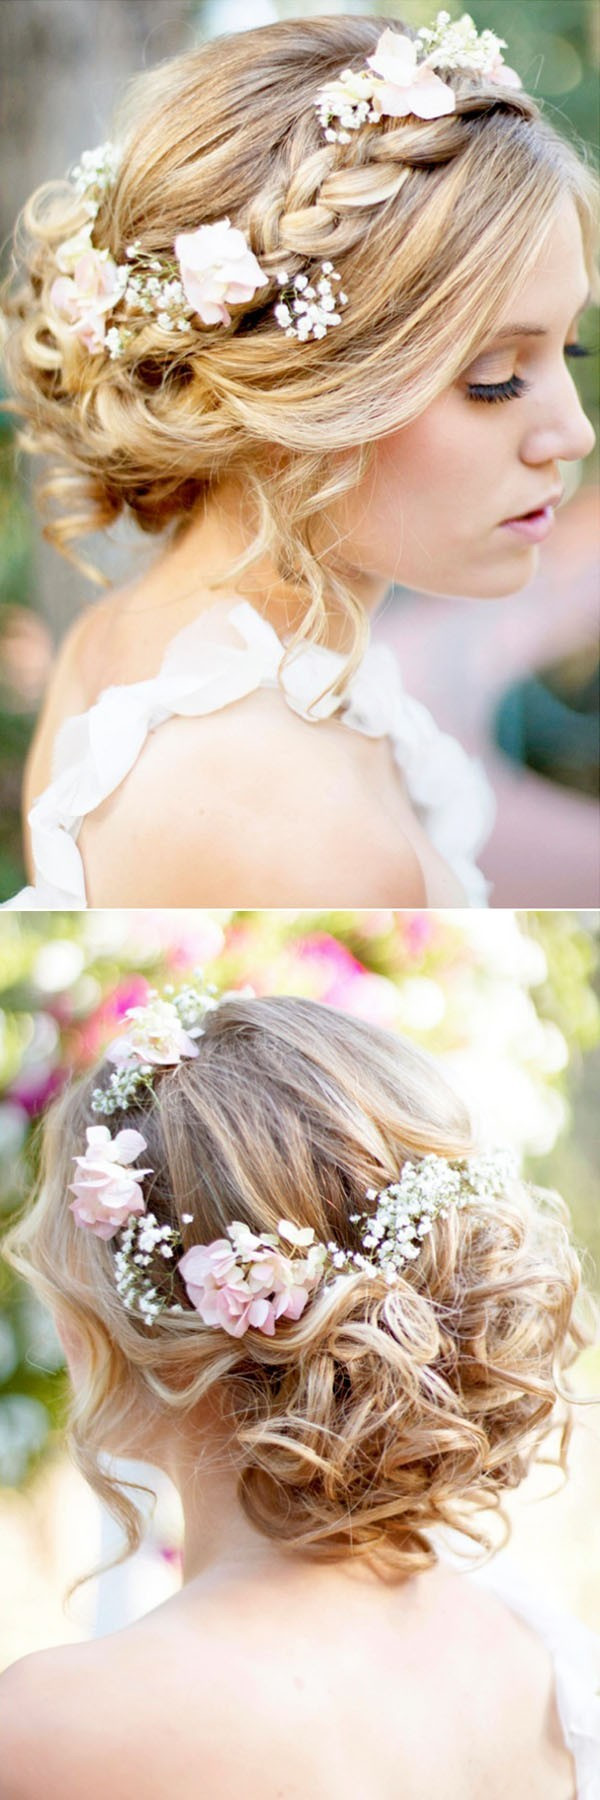 Hairstyles To Wear To A Wedding
 18 Trending Wedding Hairstyles with Flowers Oh Best Day Ever